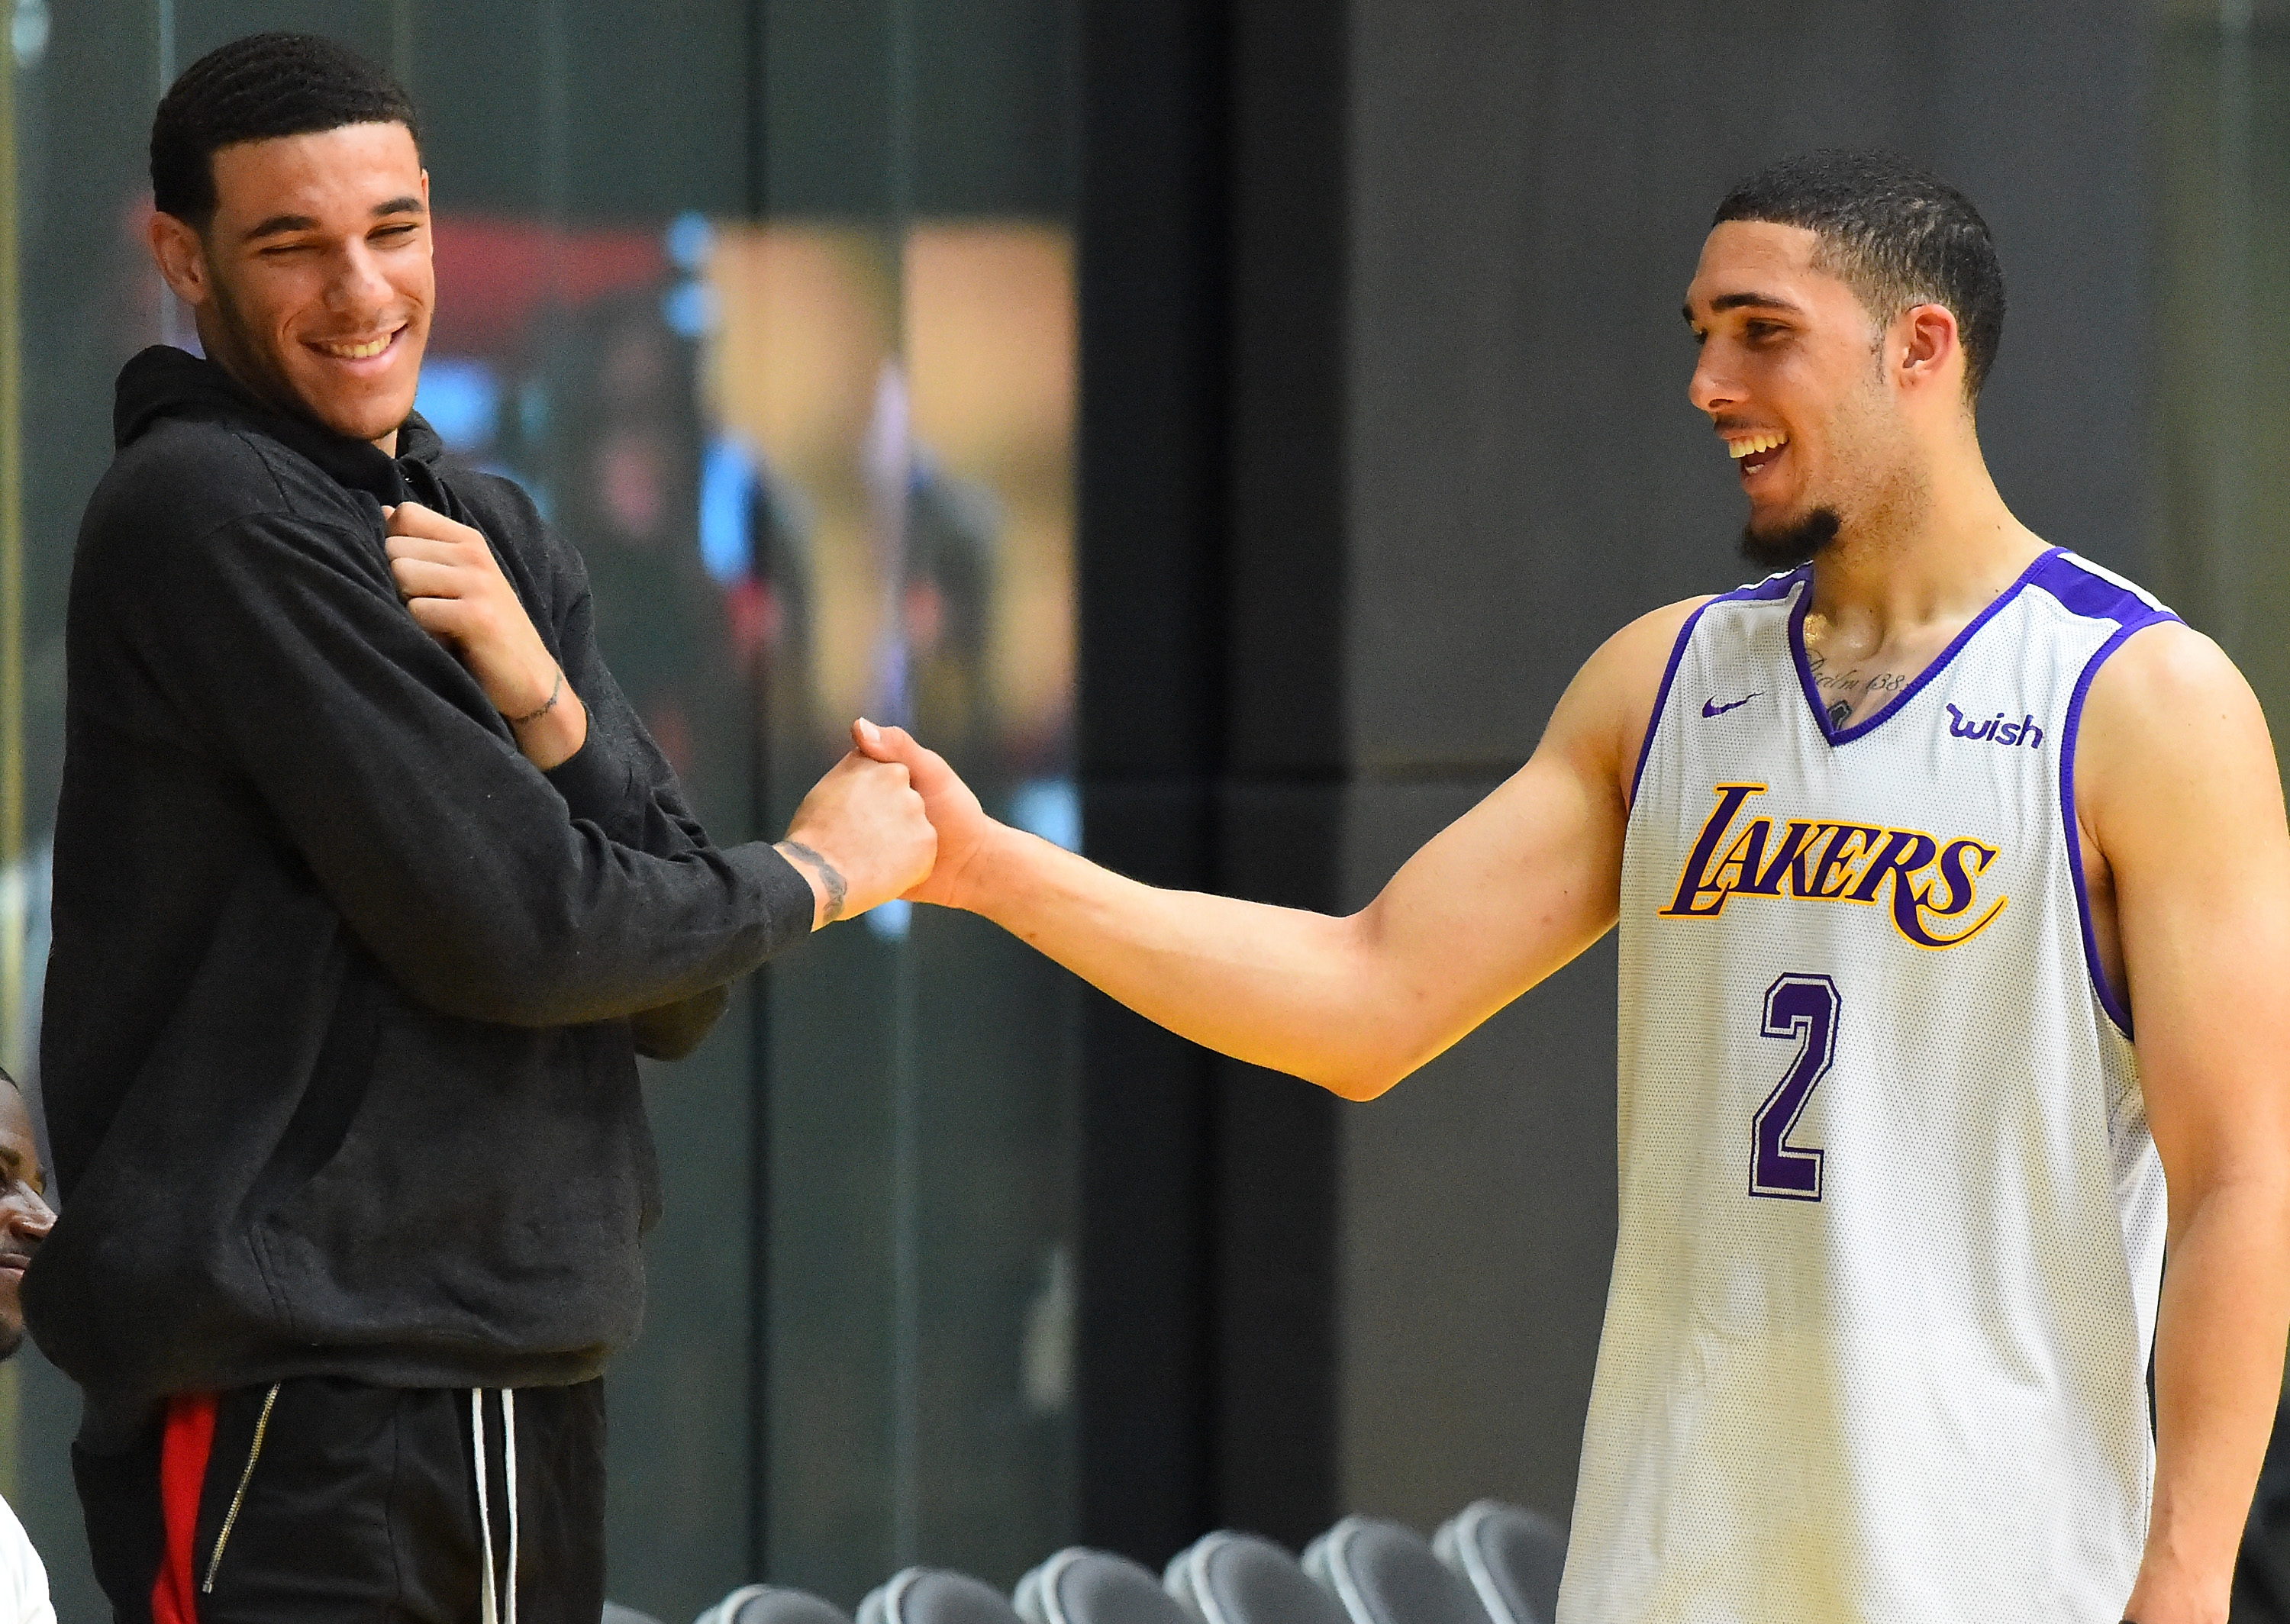 Should The Charlotte Hornets Consider Adding Lonzo or LiAngelo Ball?